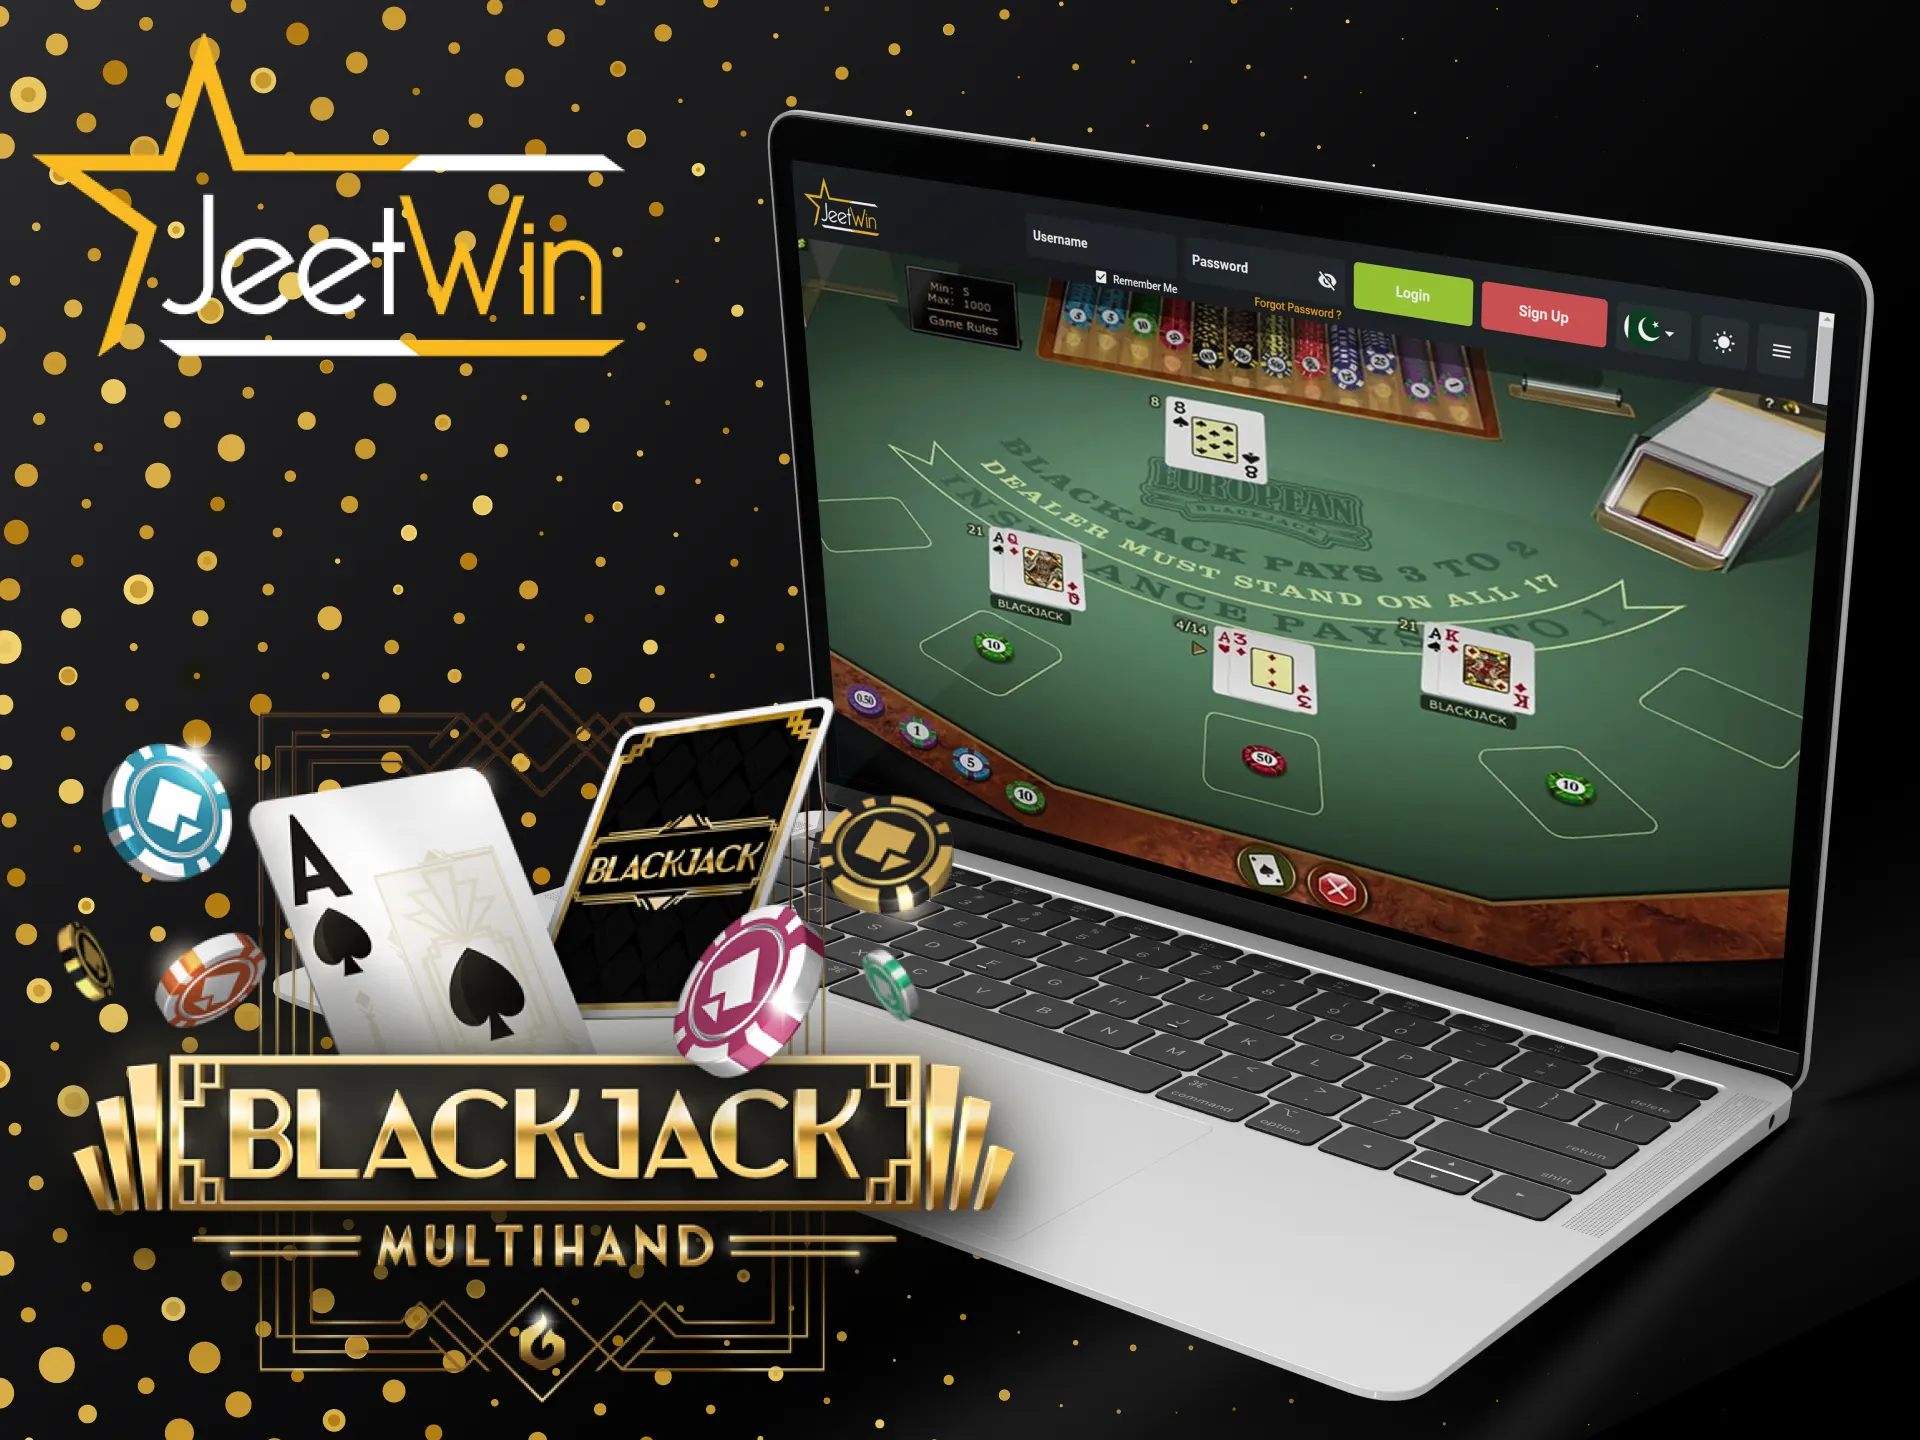 Enjoy the exciting process of playing Multihand Blackjack with JeetWin.